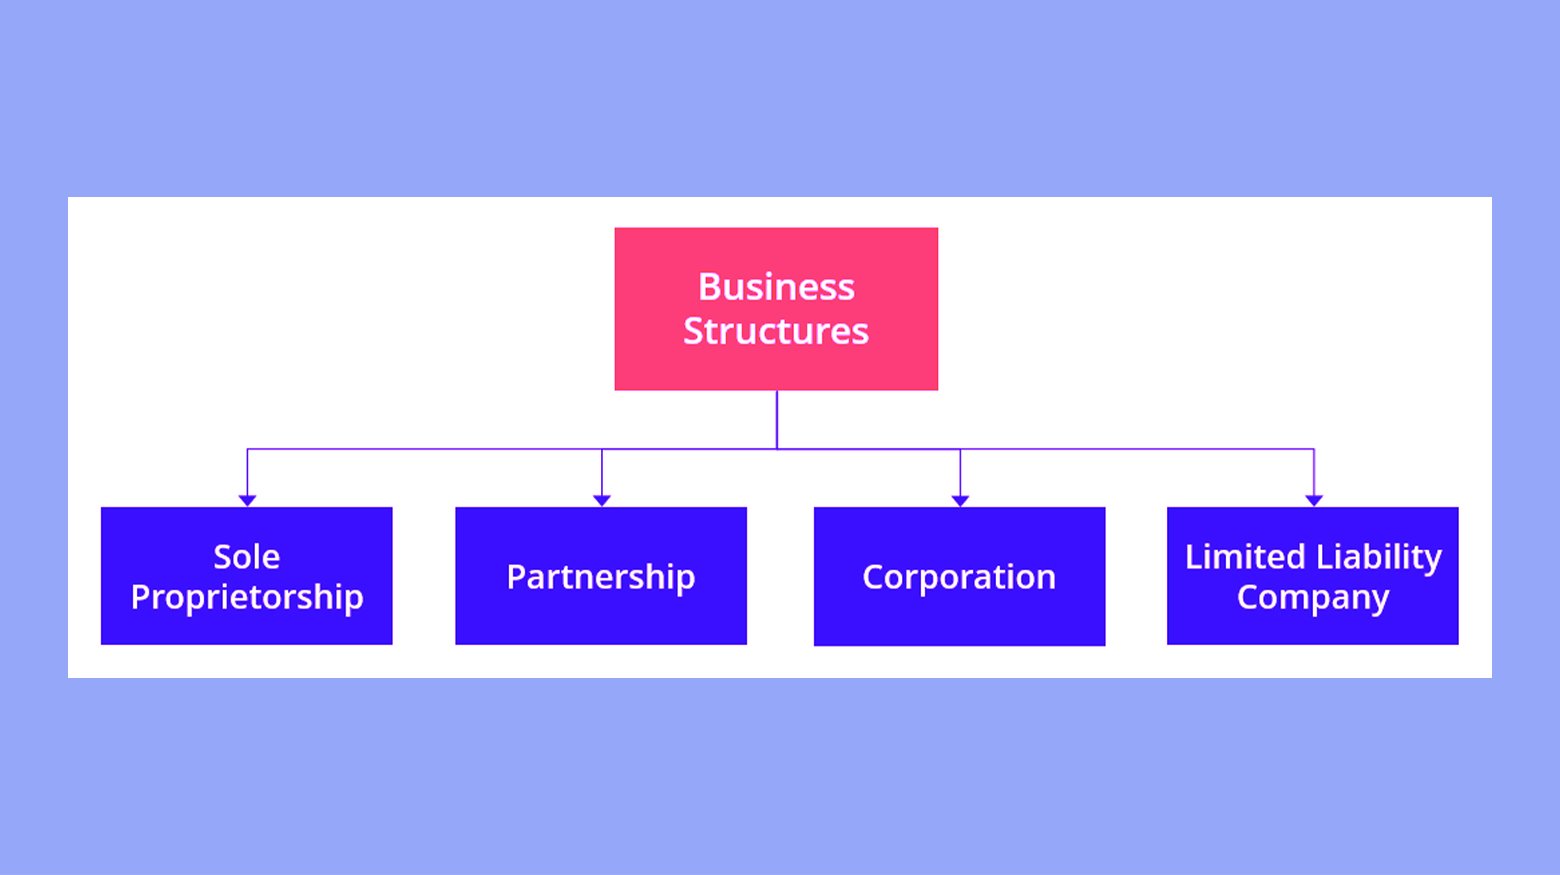 Choosing the business structure